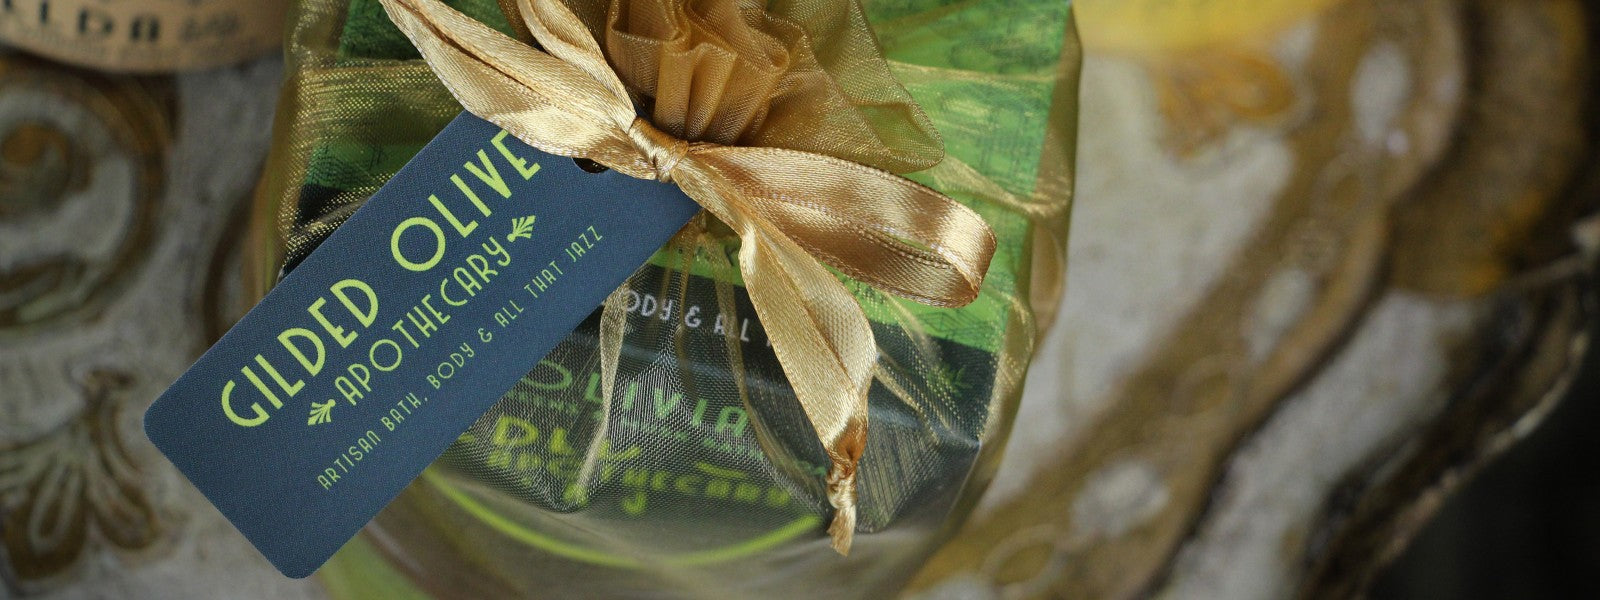 Bath & Body Gift Sets | Gilded Olive Apothecary